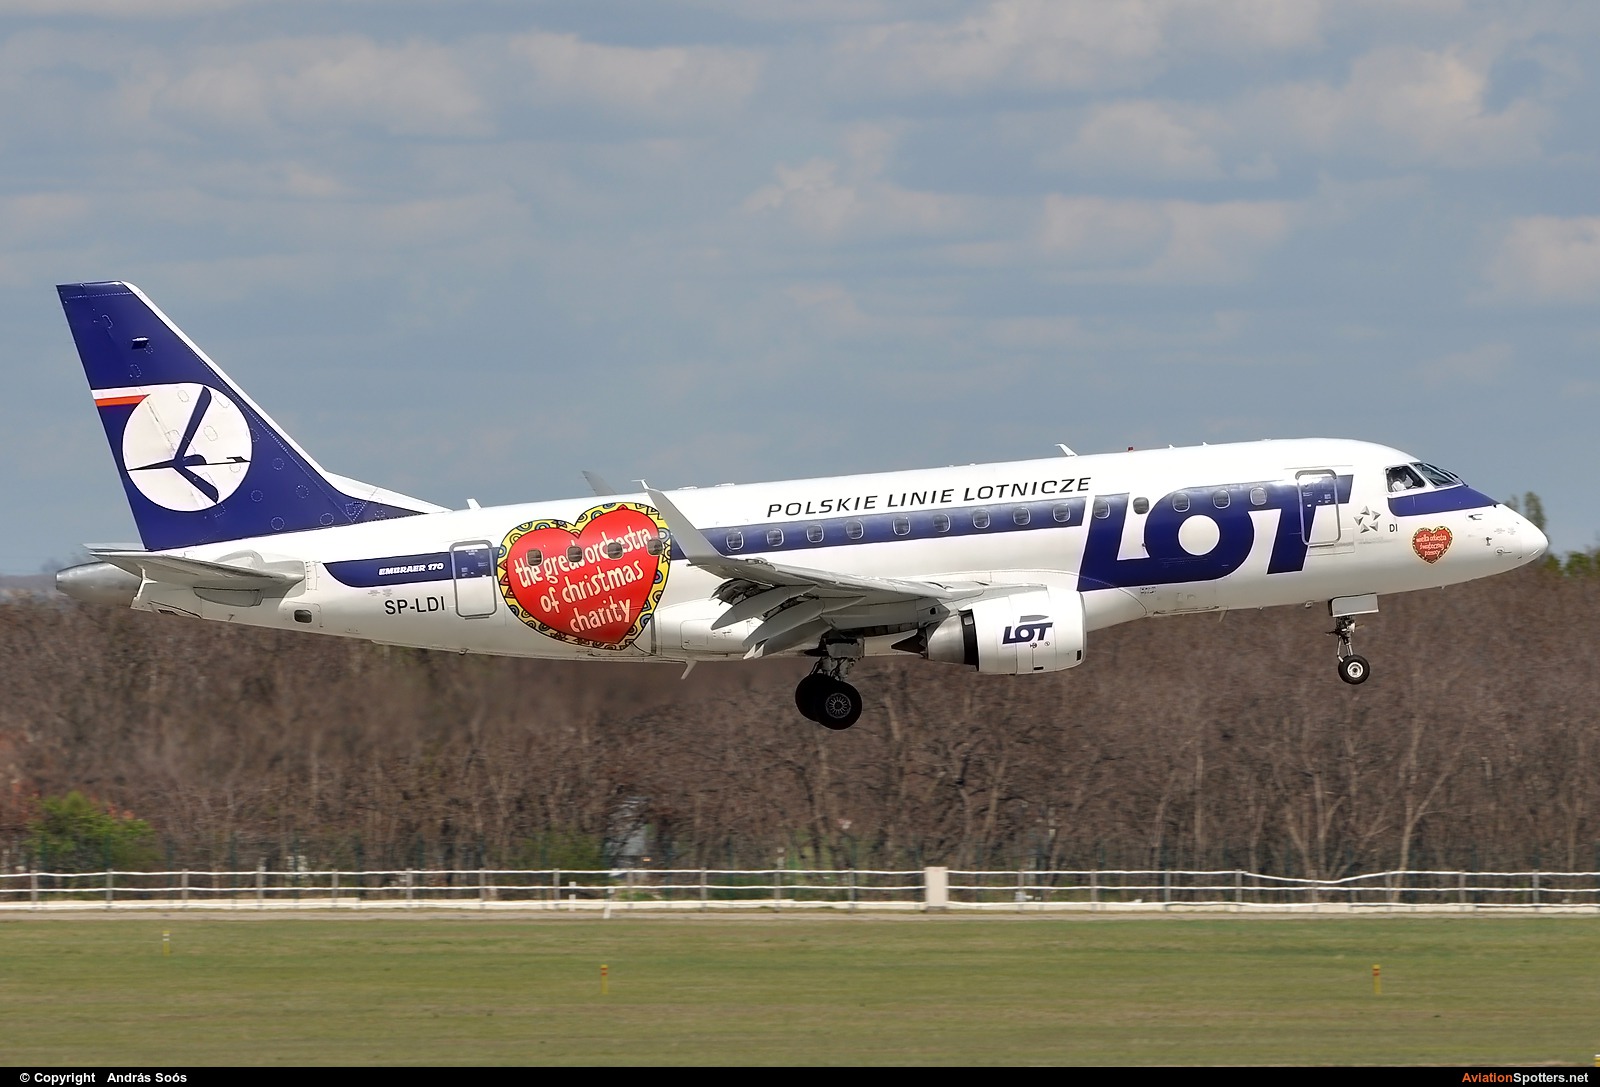 LOT - Polish Airlines  -  170  (SP-LDI) By András Soós (sas1965)